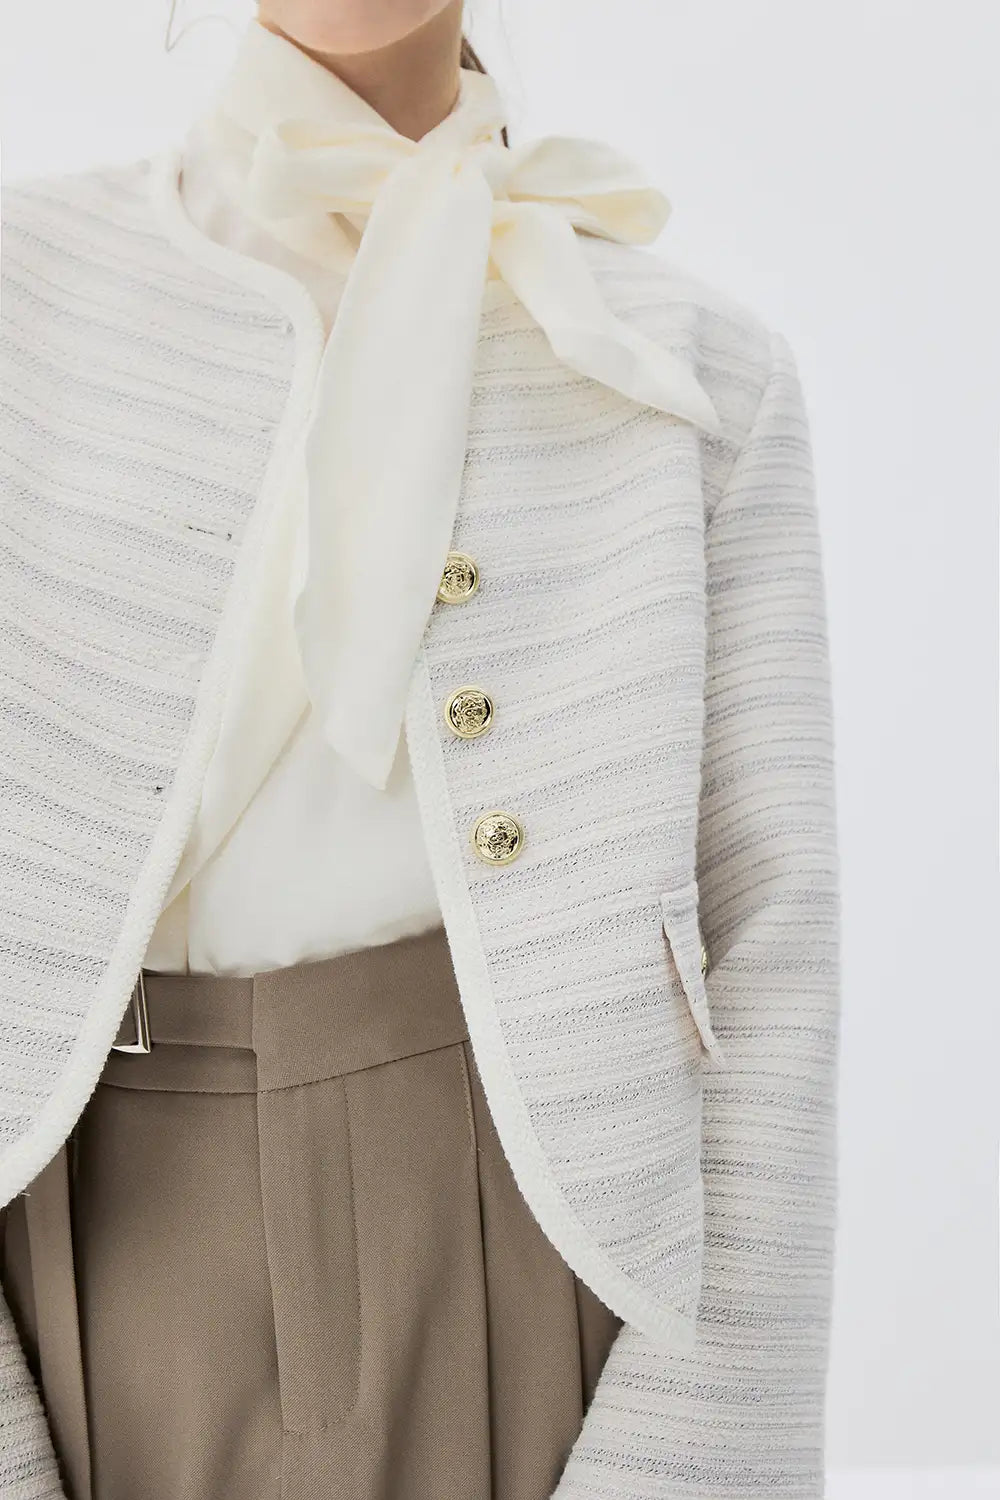 Textured Jacket with Gold Buttons Classic Women's Fashion